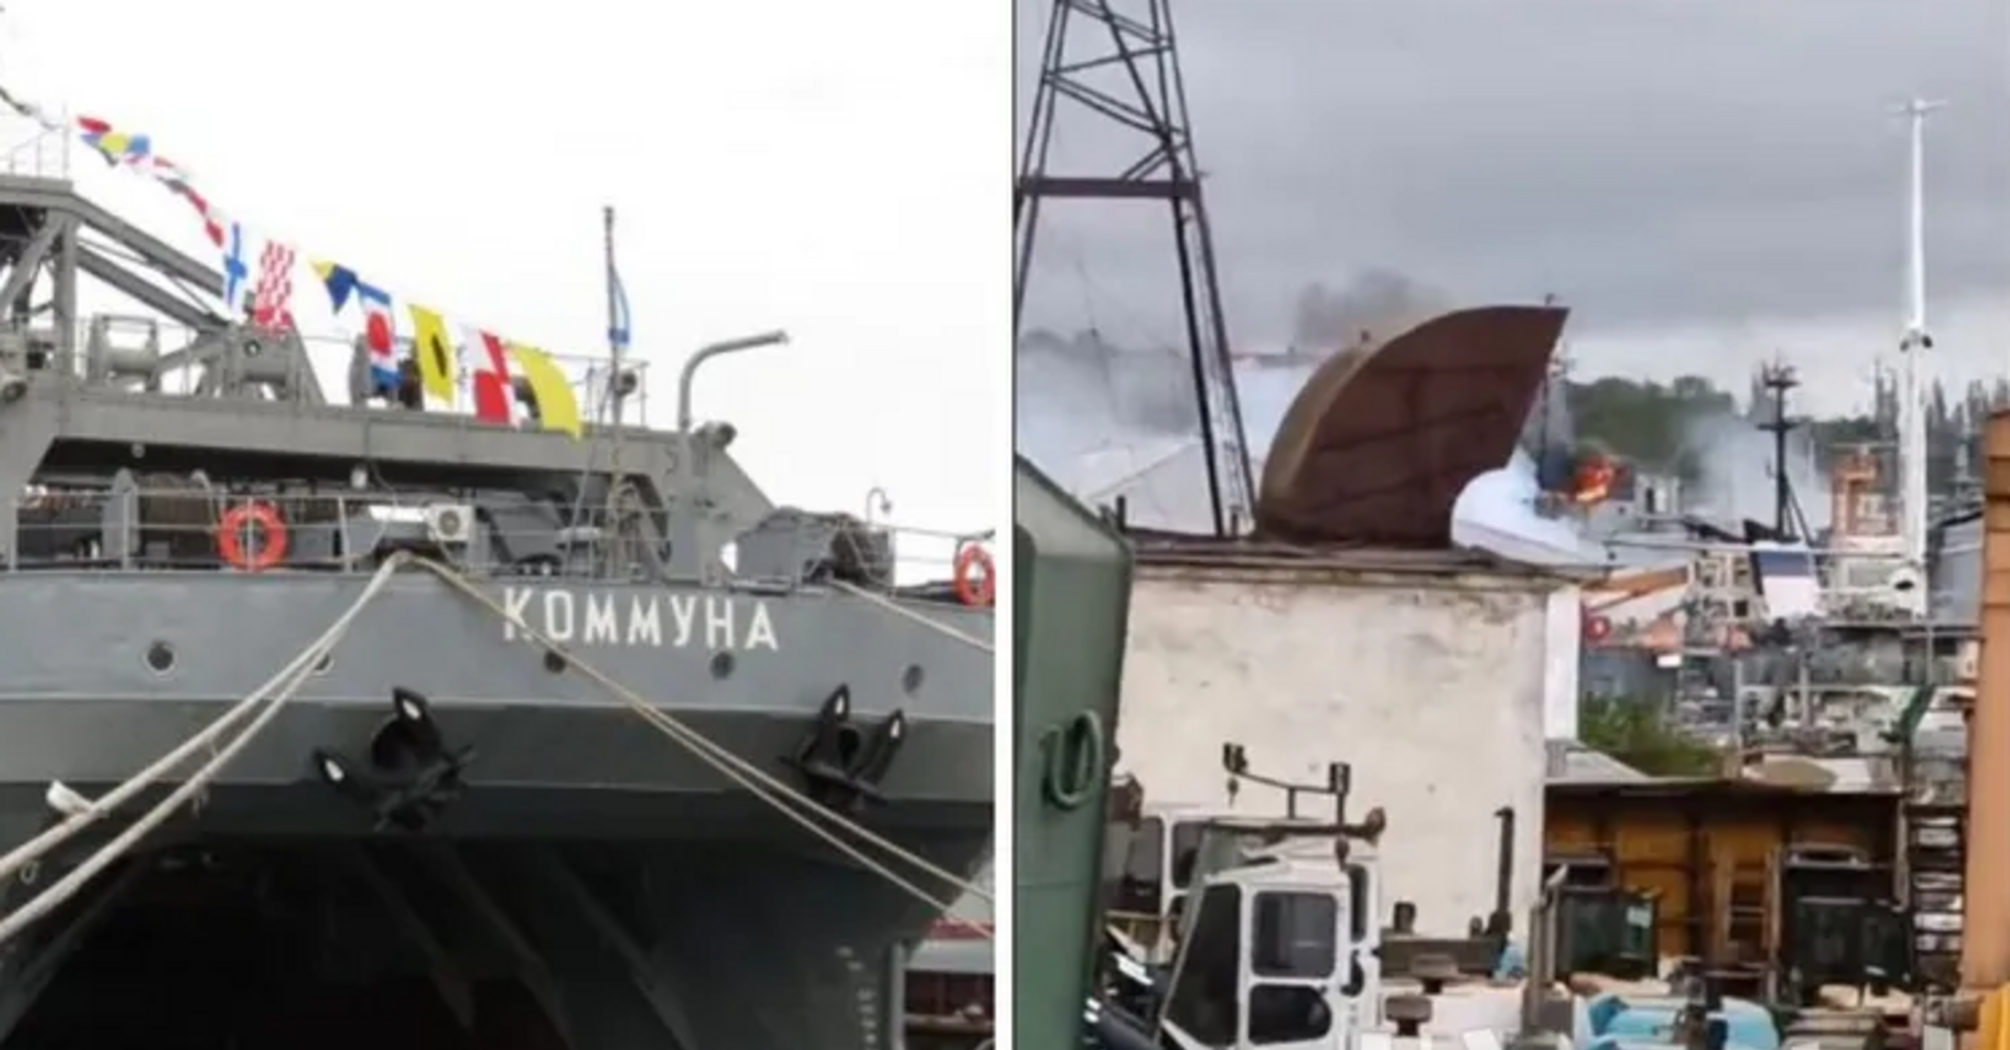 Spokesman of the Navy of the Armed Forces of Ukraine: the Russian Navy ship Kommuna was attacked in Sukharnaya Bay of Sevastopol (video)